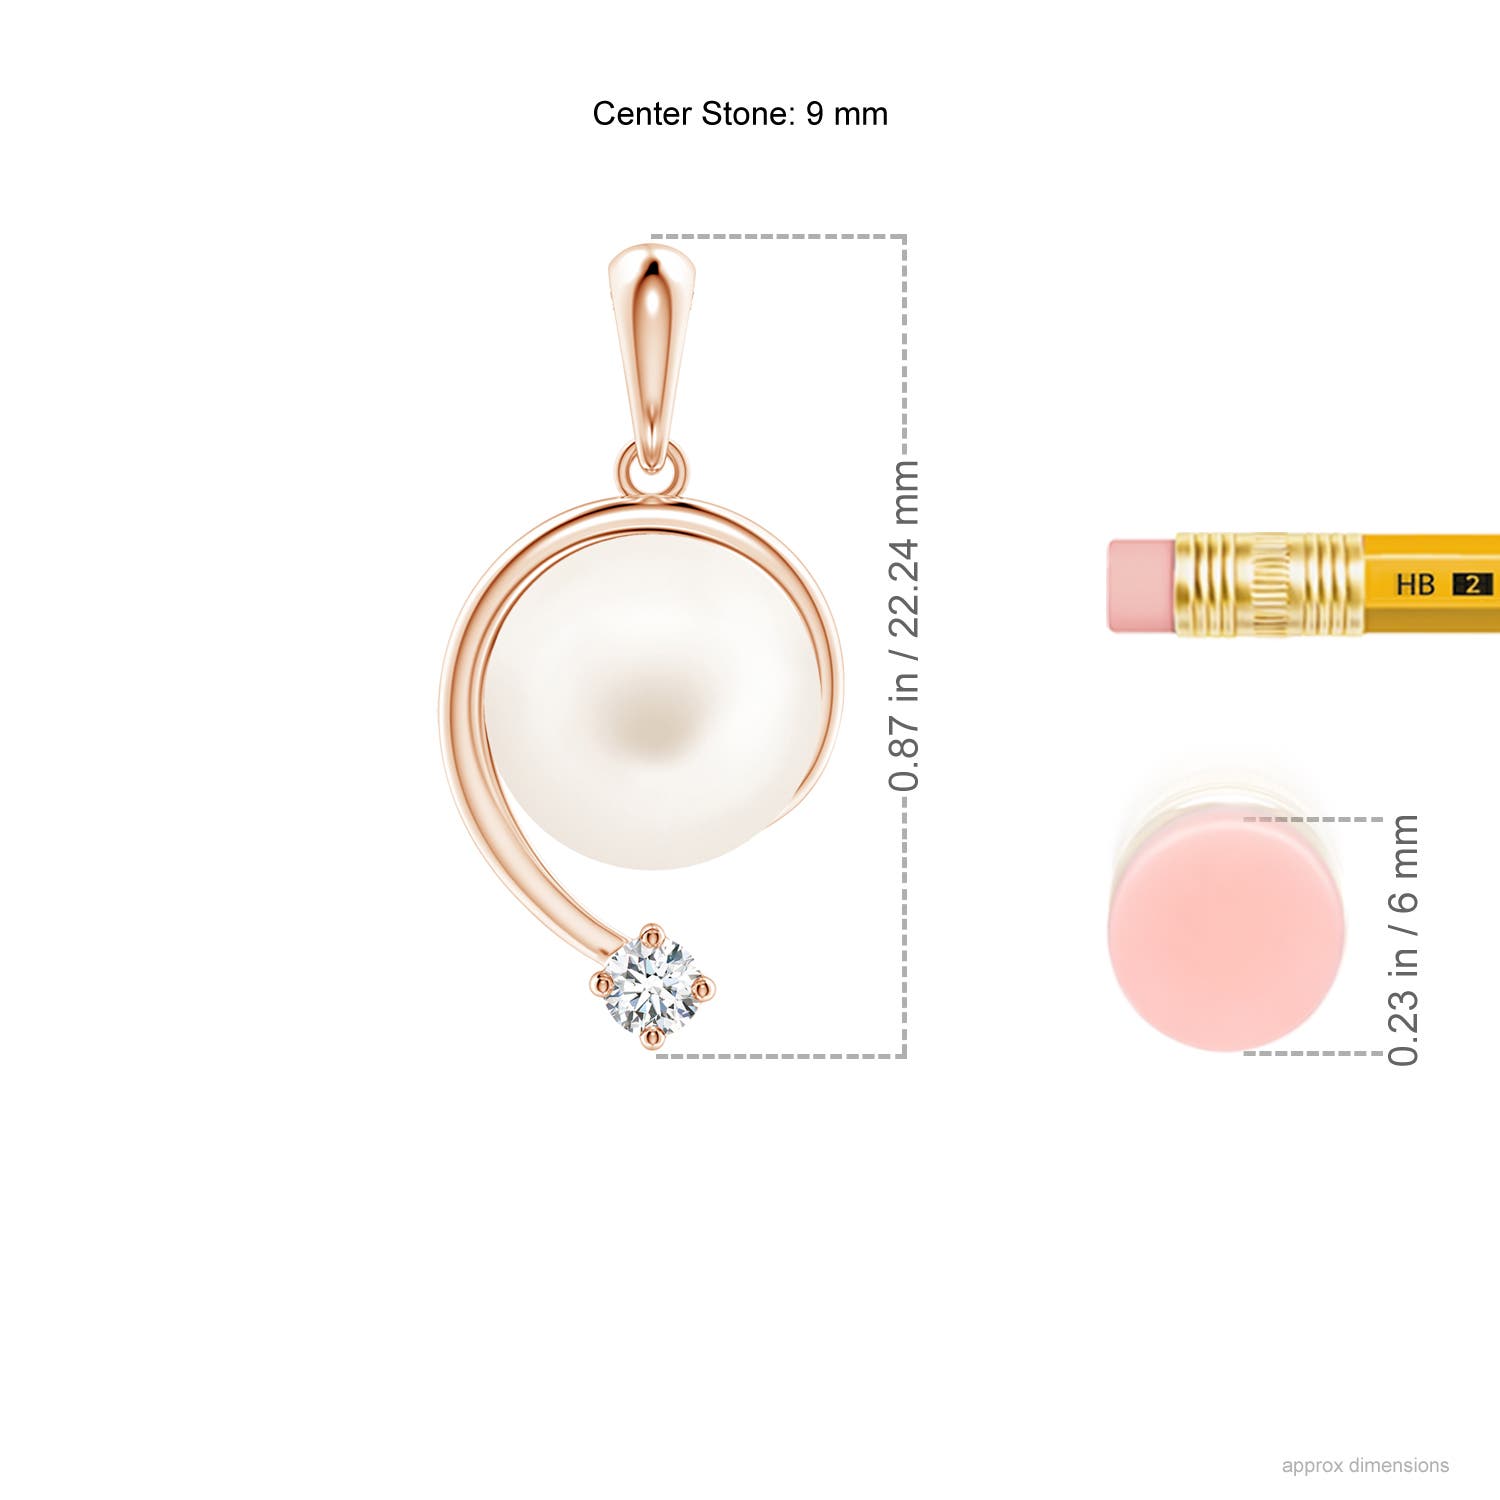 AA / 5.32 CT / 14 KT Rose Gold